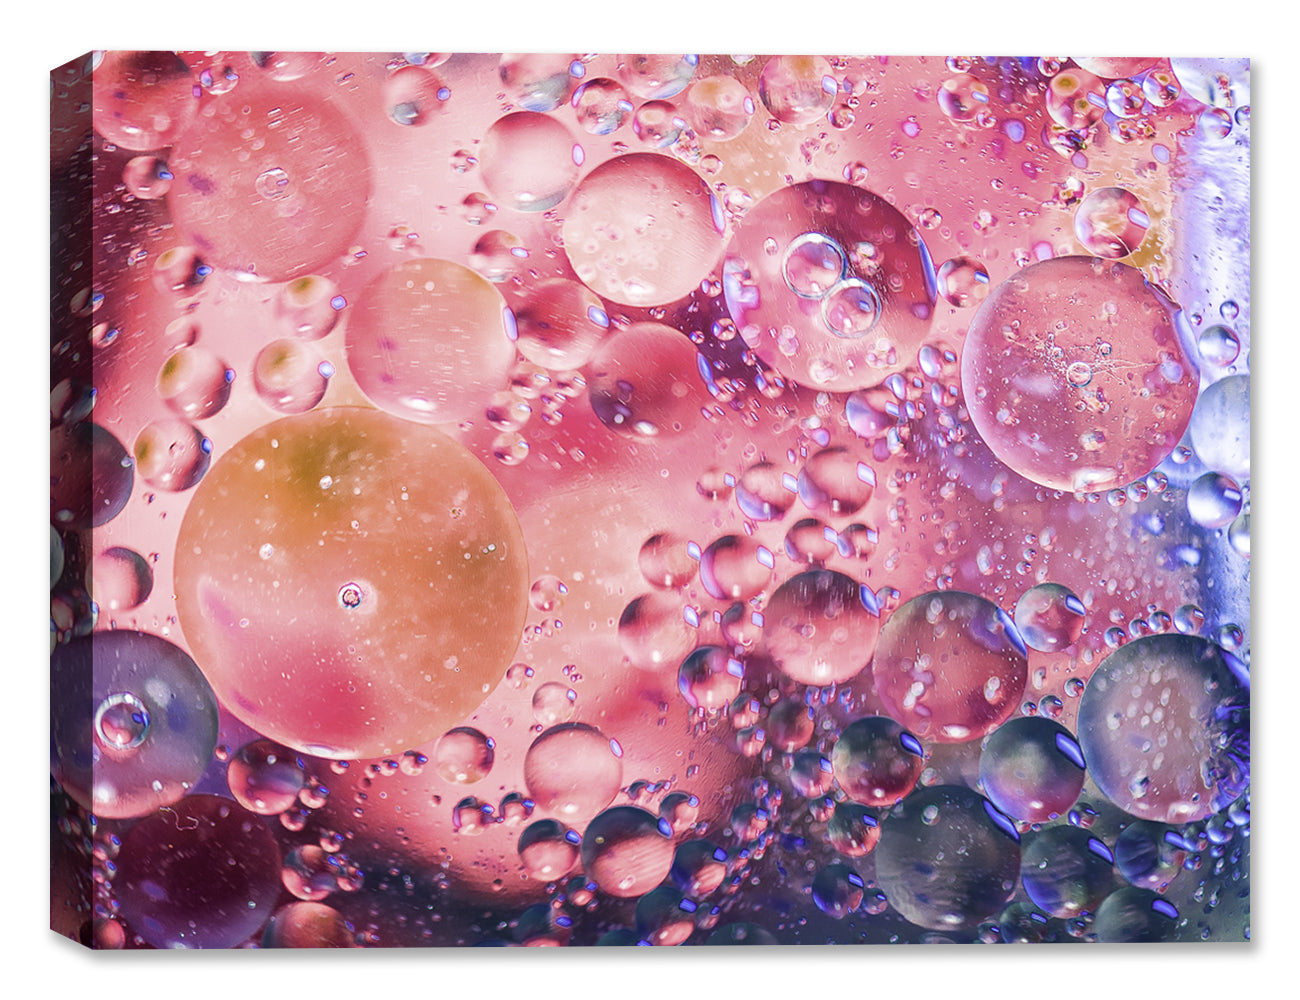 Bubbles No. 23 - Latex on Canvas - Abstract Art